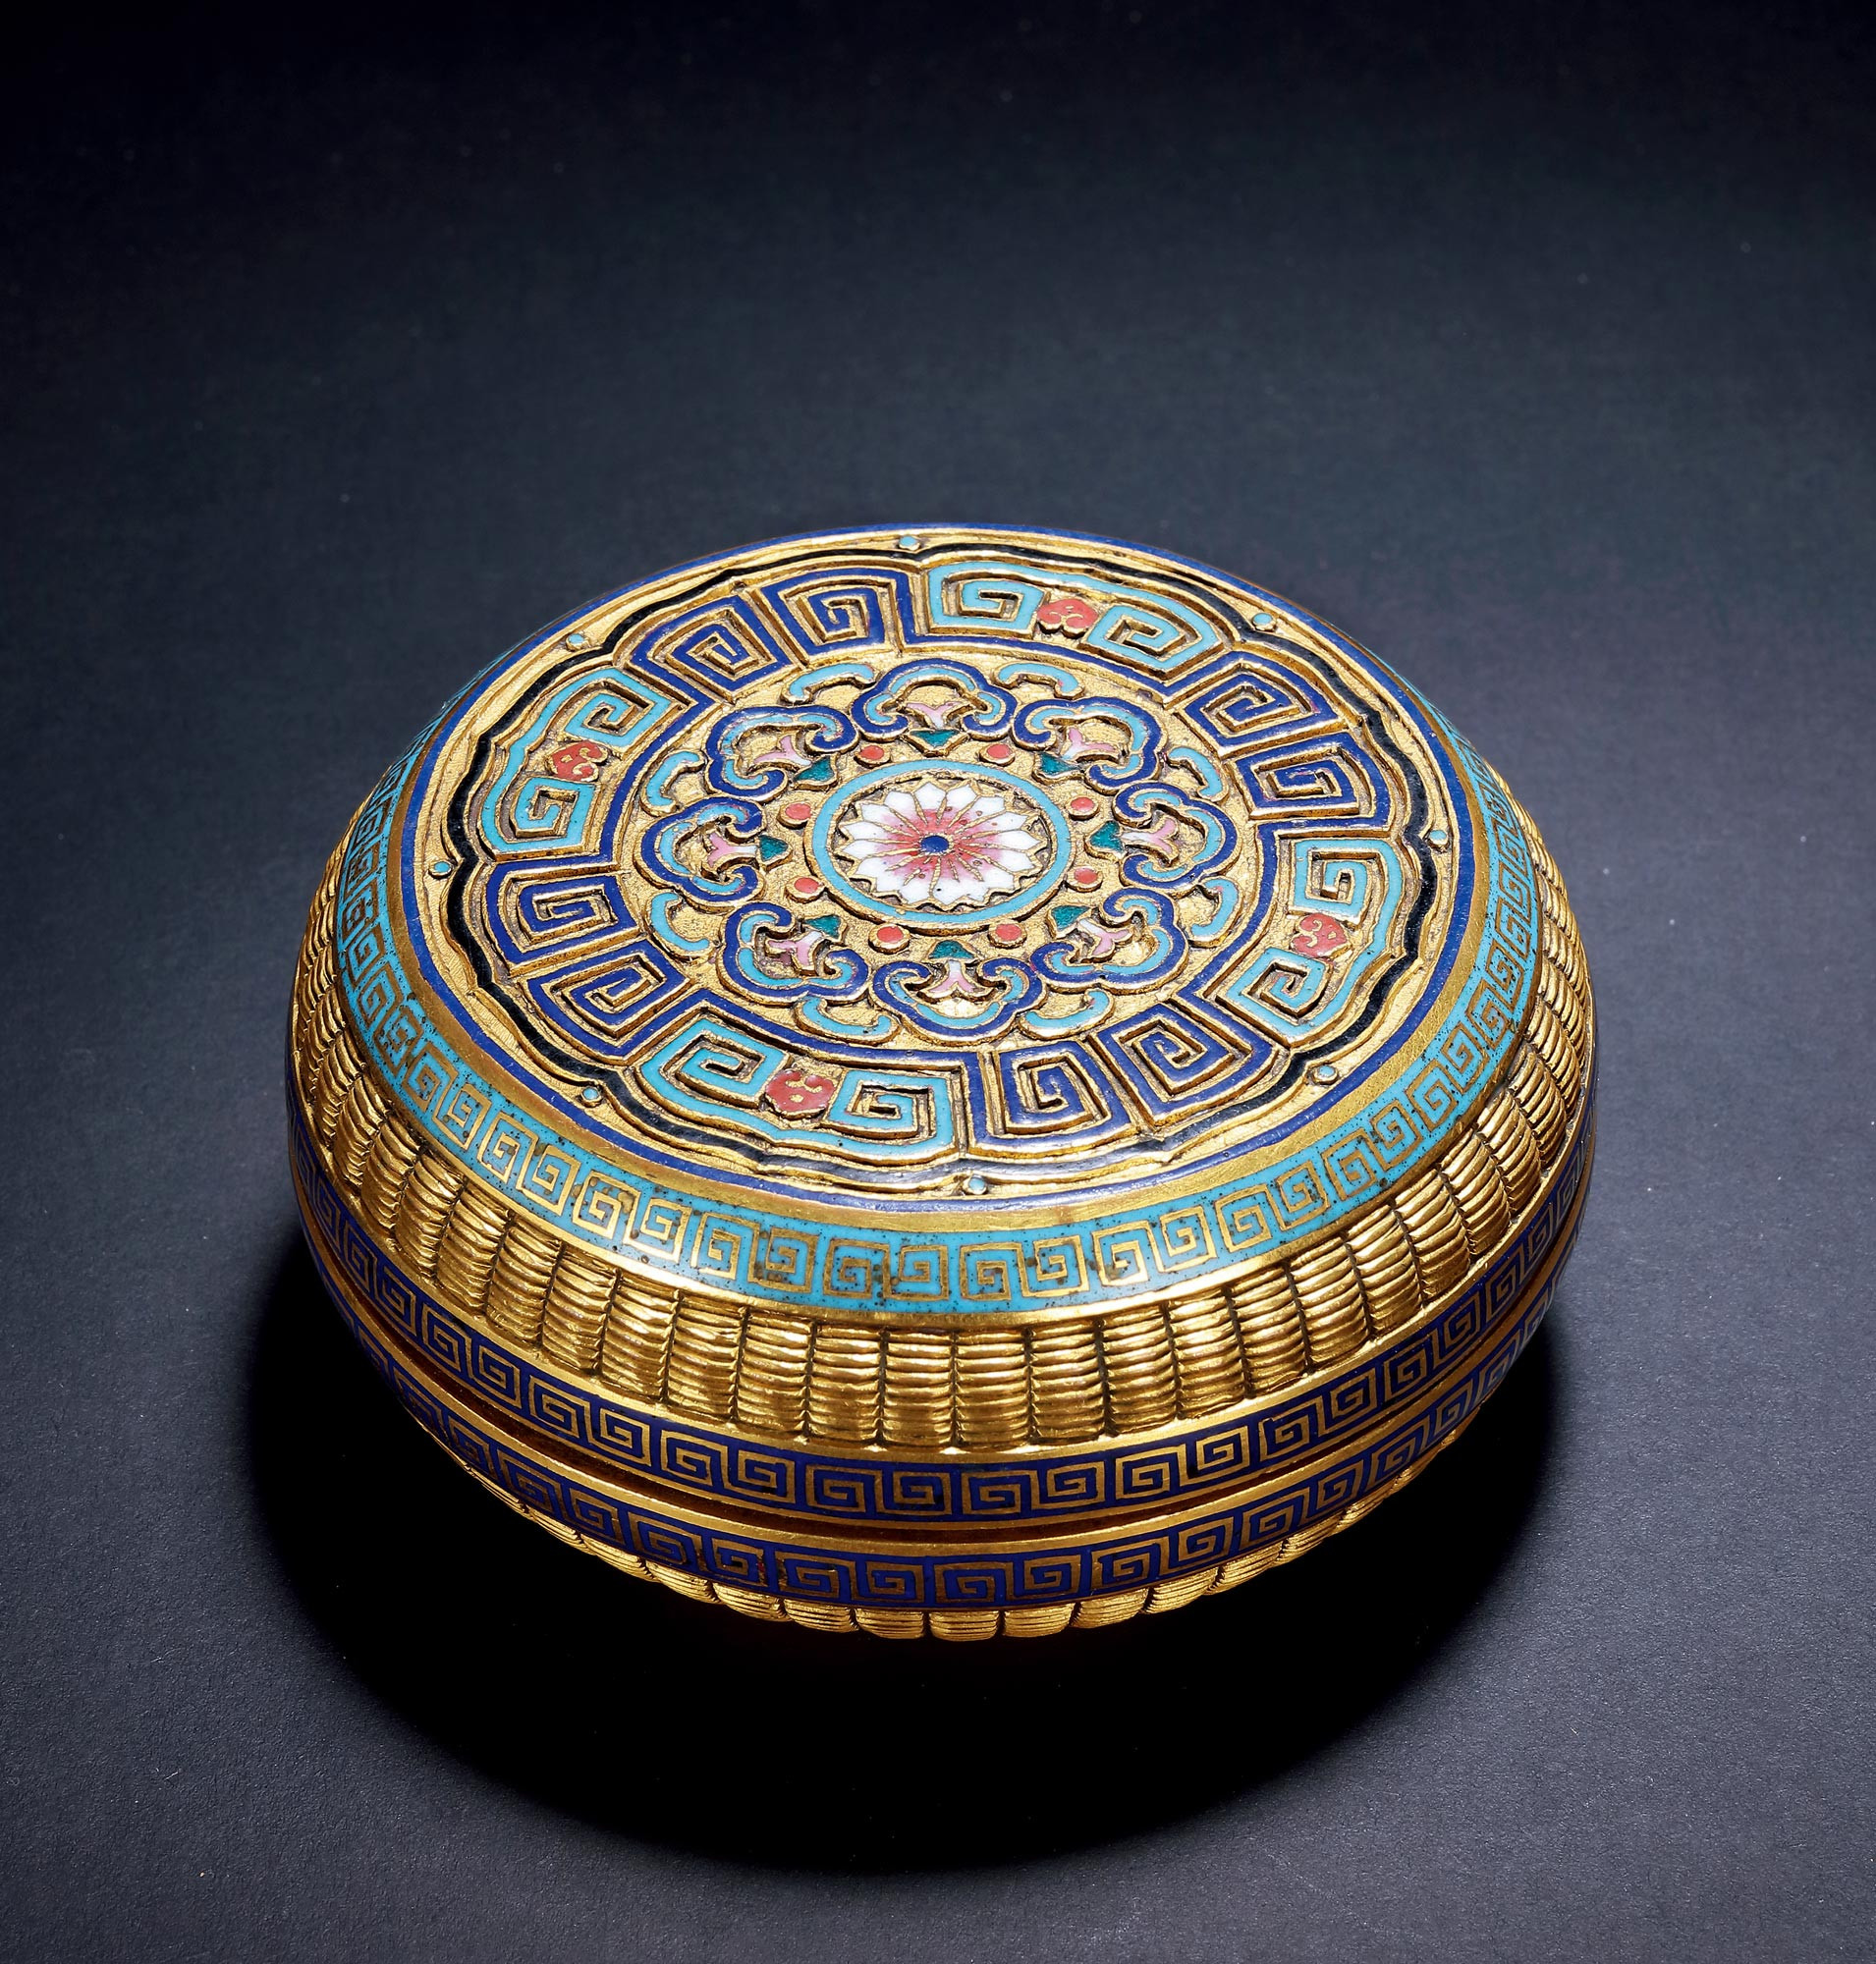 A RARE BRONZE BOX AND COVER WITH FINELY CARVED‘POLUO’ PATTERN